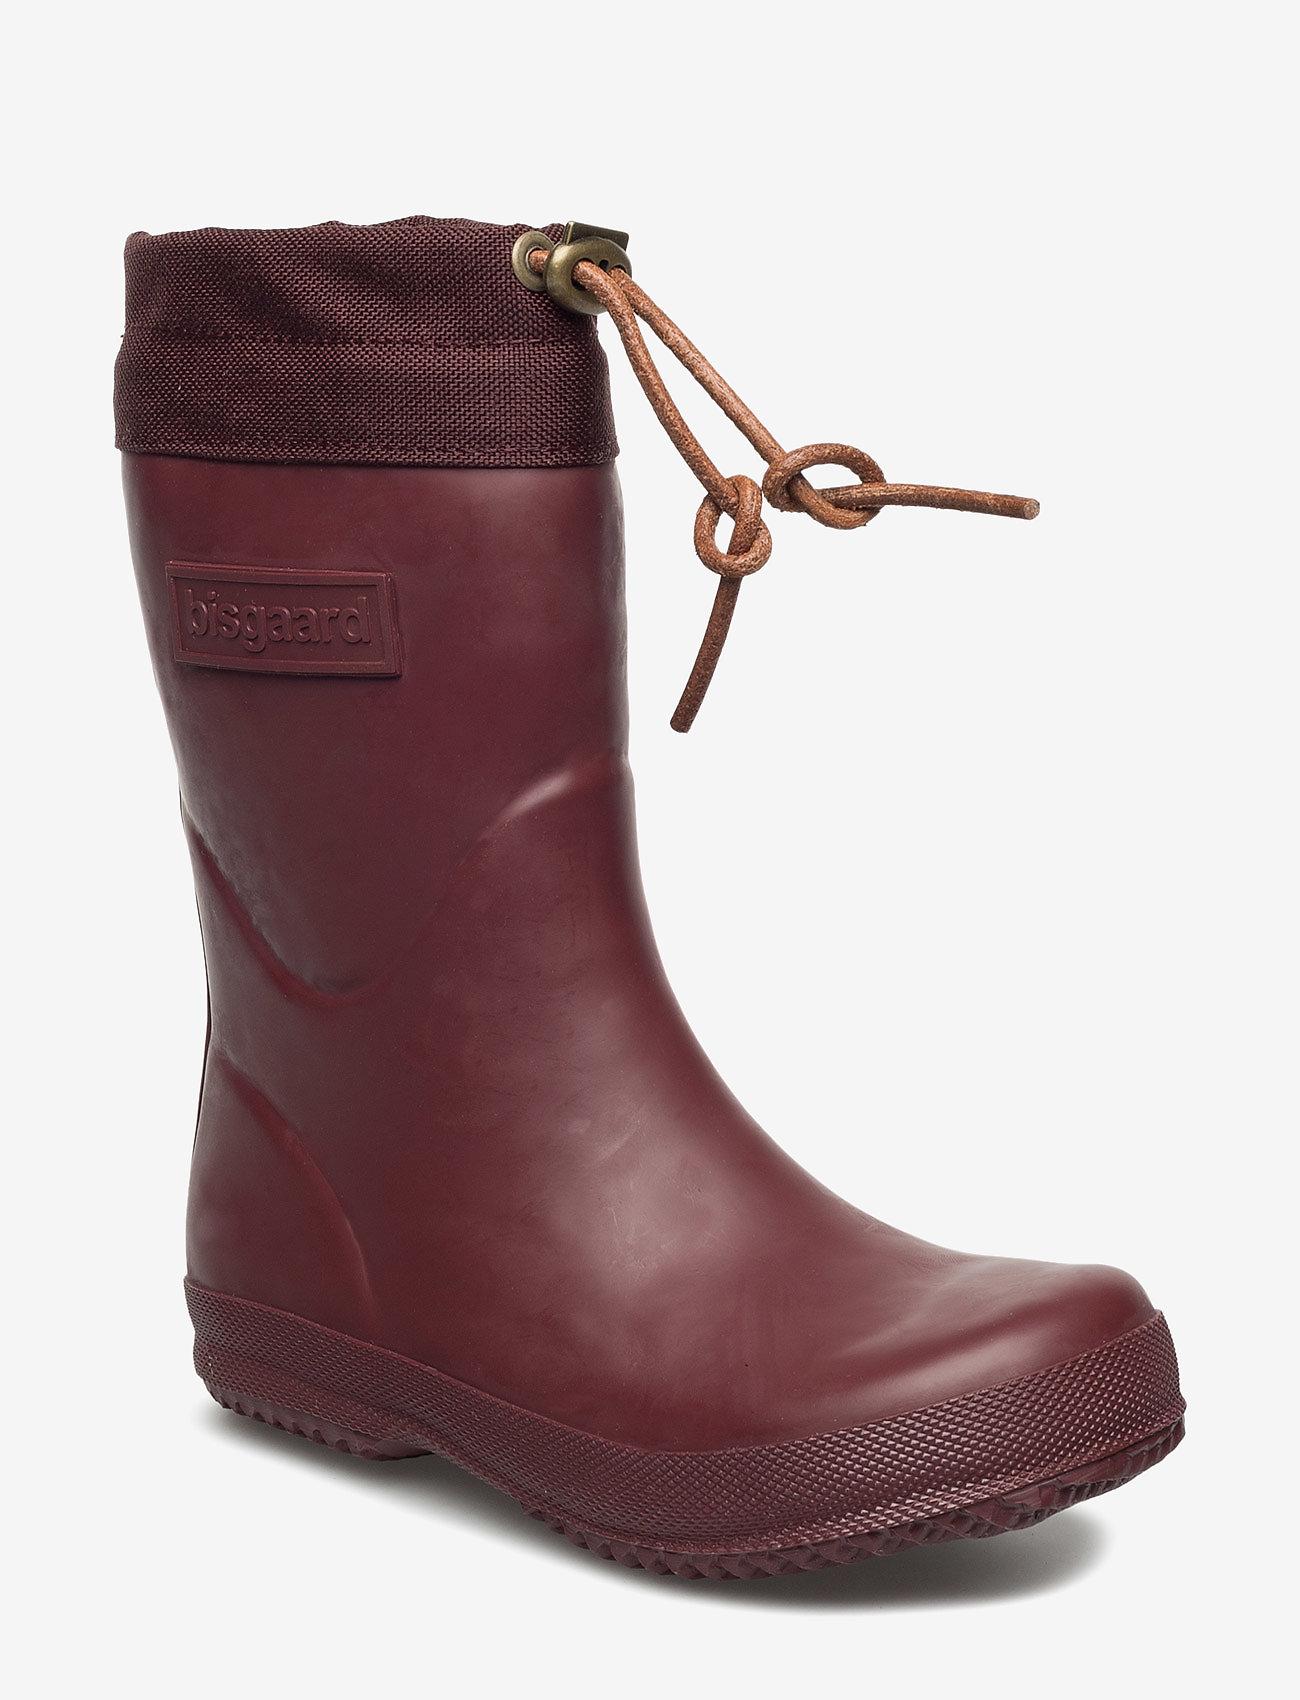 Bisgaard - bisgaard thermo - lined rubberboots - bordeaux - 1